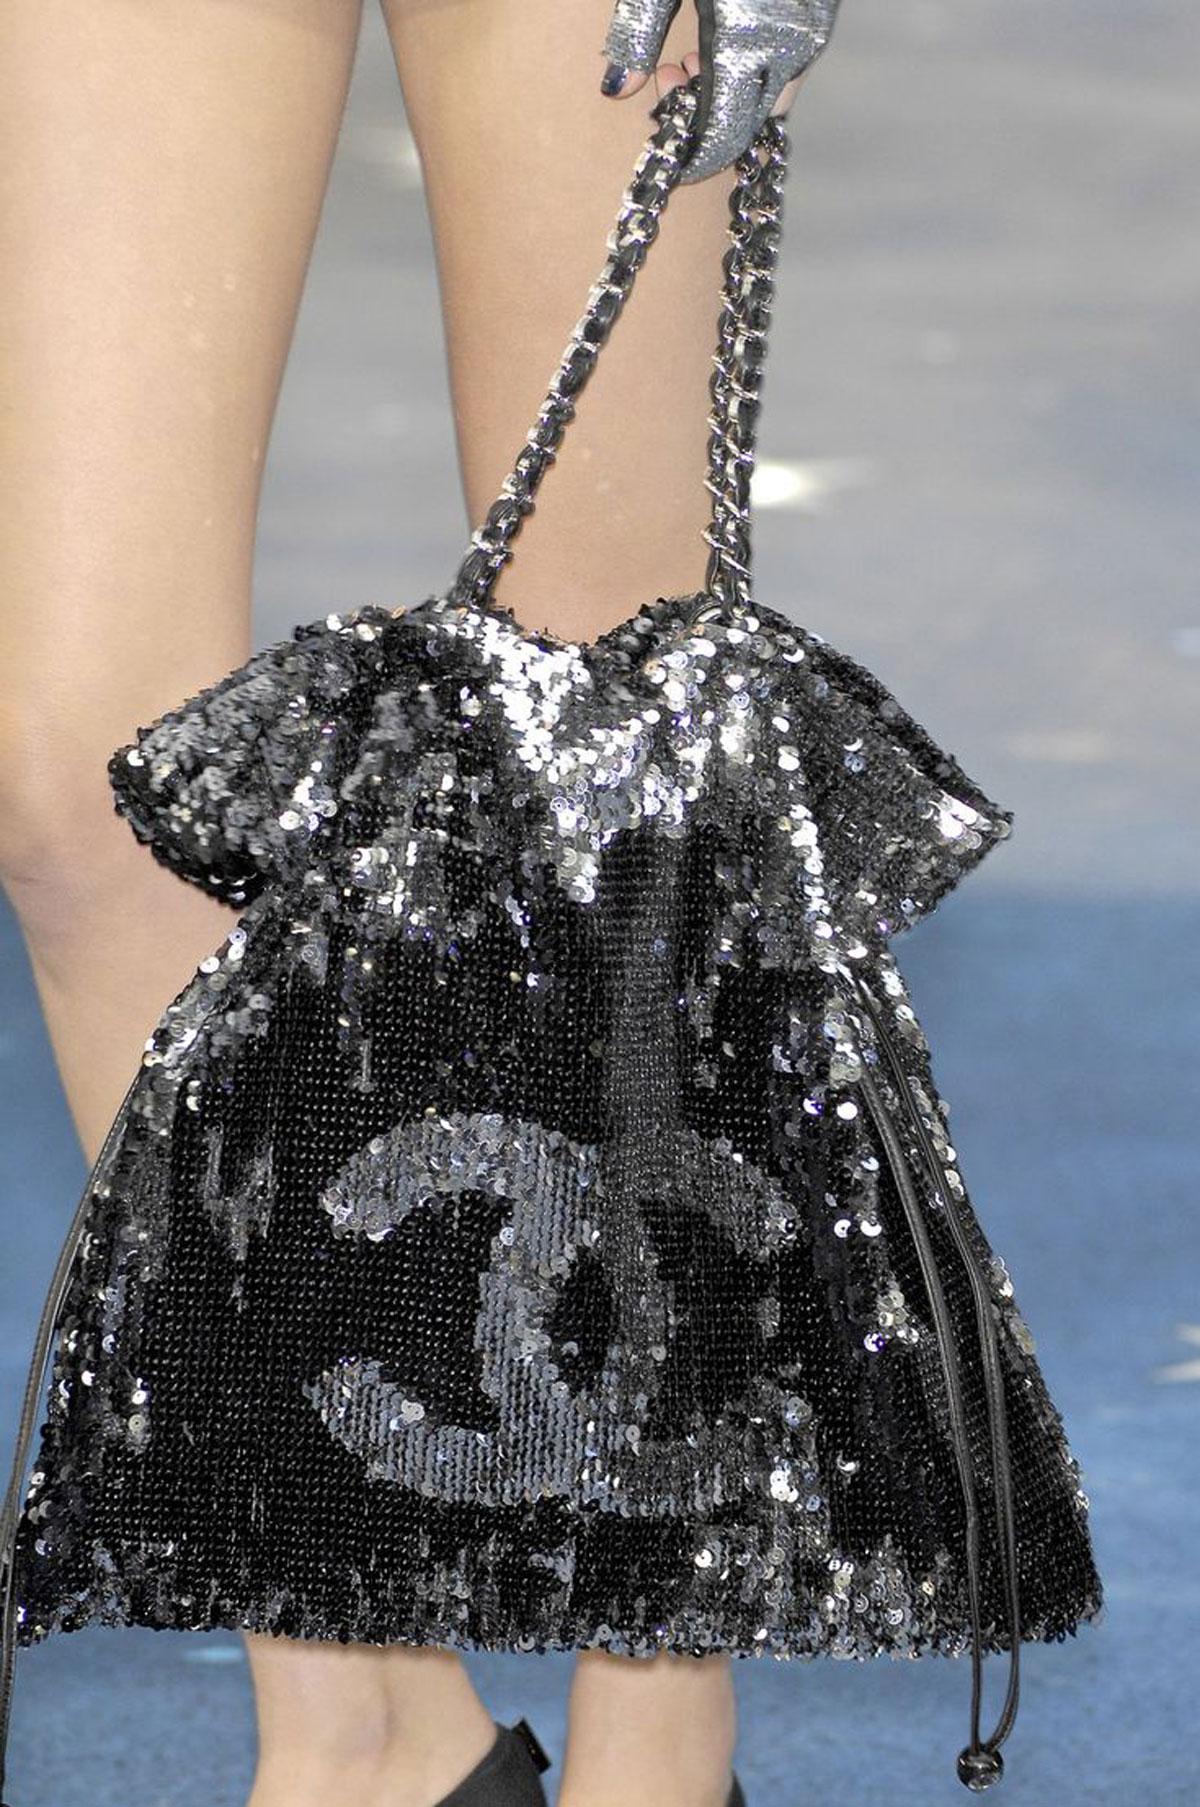 Chanel Timeless Metallic Sequin Drawstring CC Reversible Large Rare Silver Tote

Year: 2010 Runway {Vintage 14 Years}

Silver hardware
Leather drawstrings on side with CC mirrored logo tab
Interwoven chain and leather shoulder straps. 
Magnetic